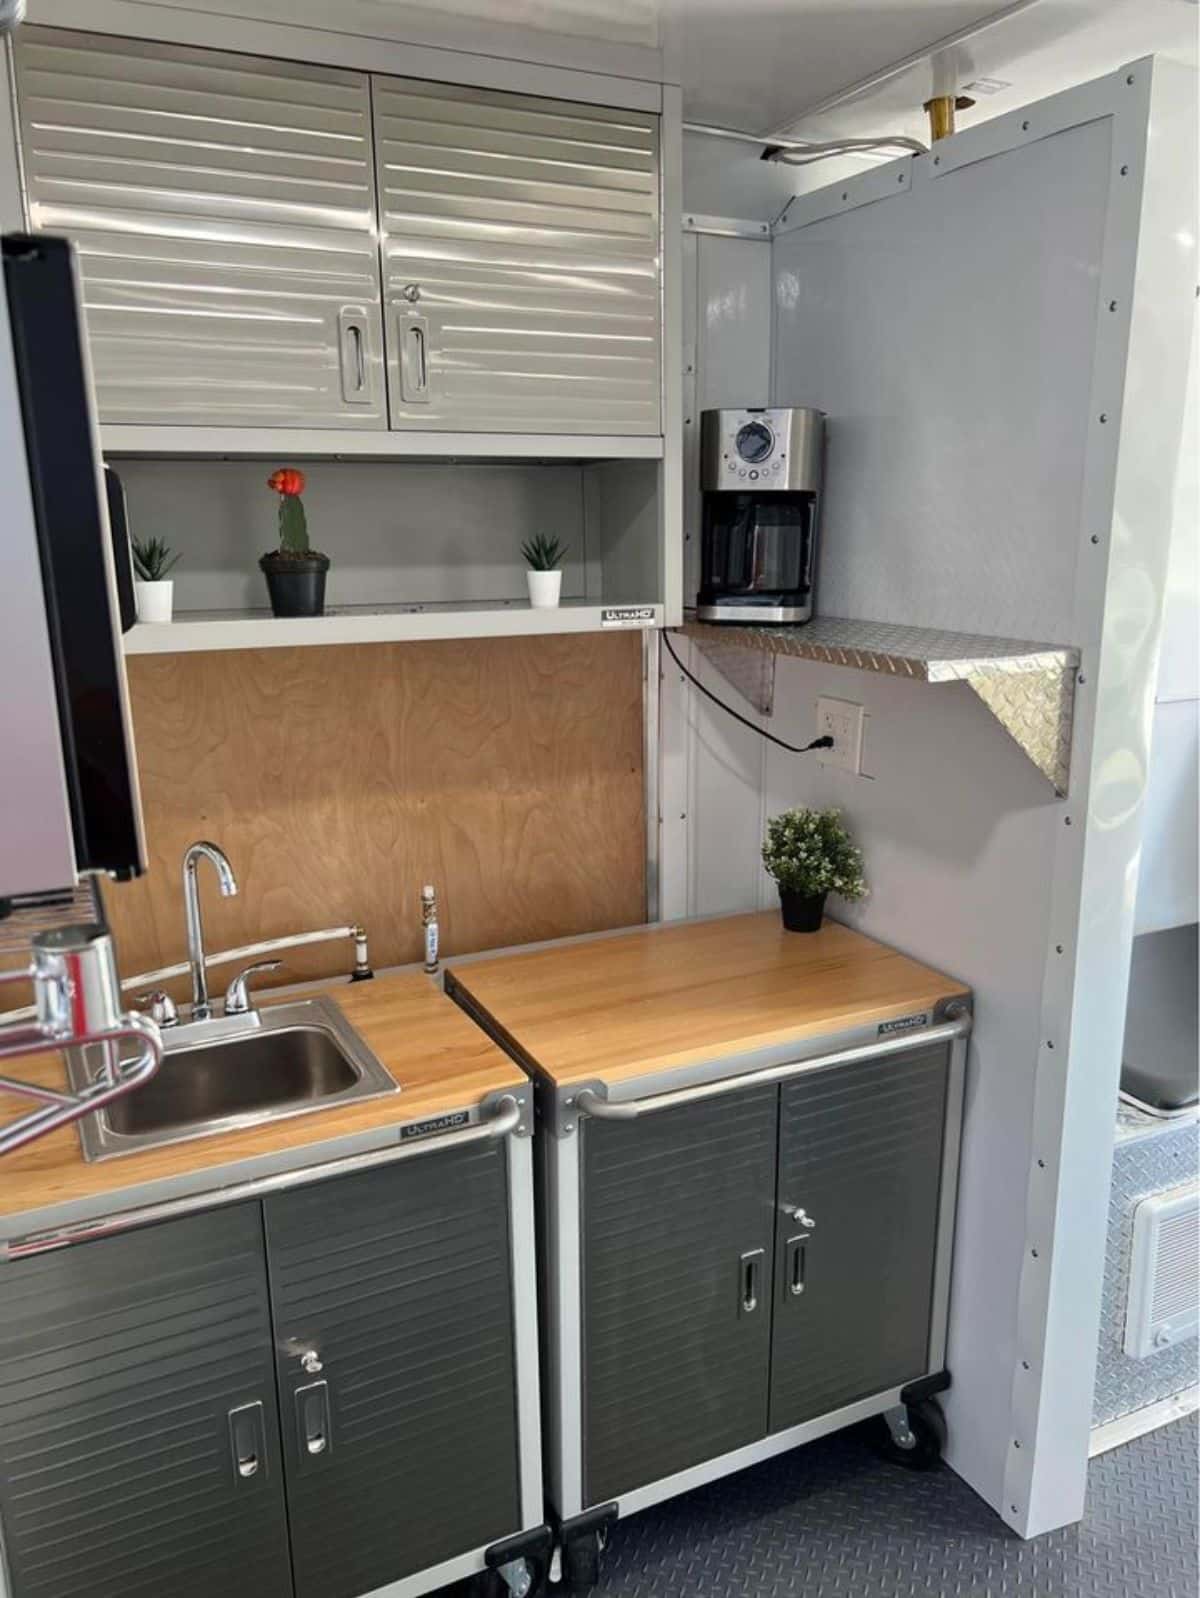 kitchen of tiny trailer home has all the necessary appliances and storage cabinets